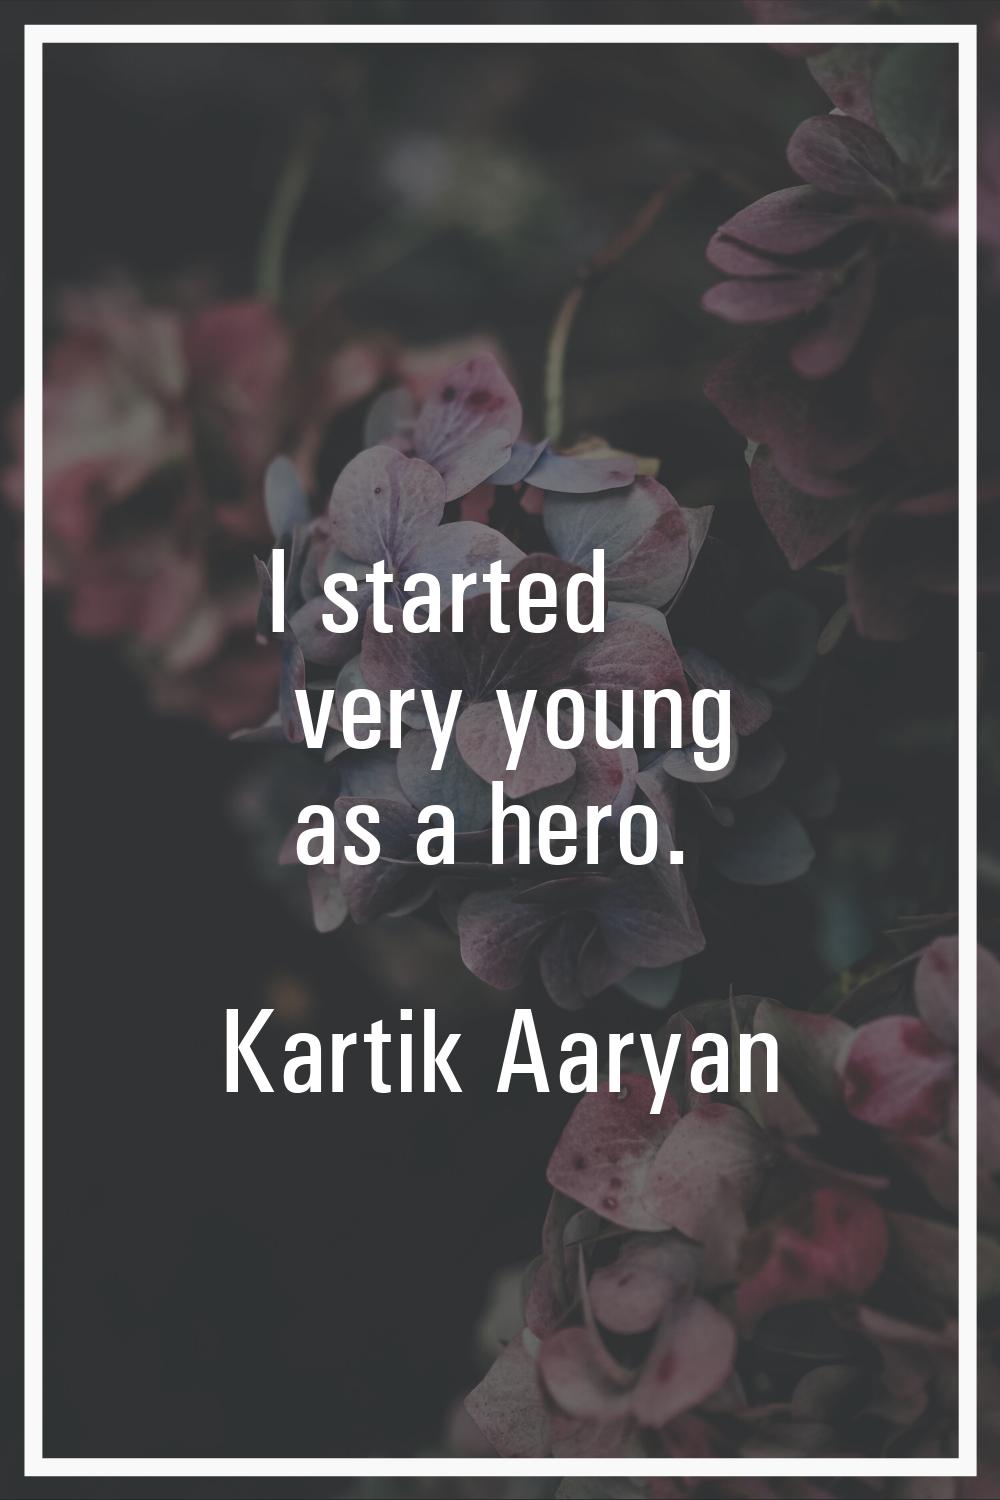 I started very young as a hero.